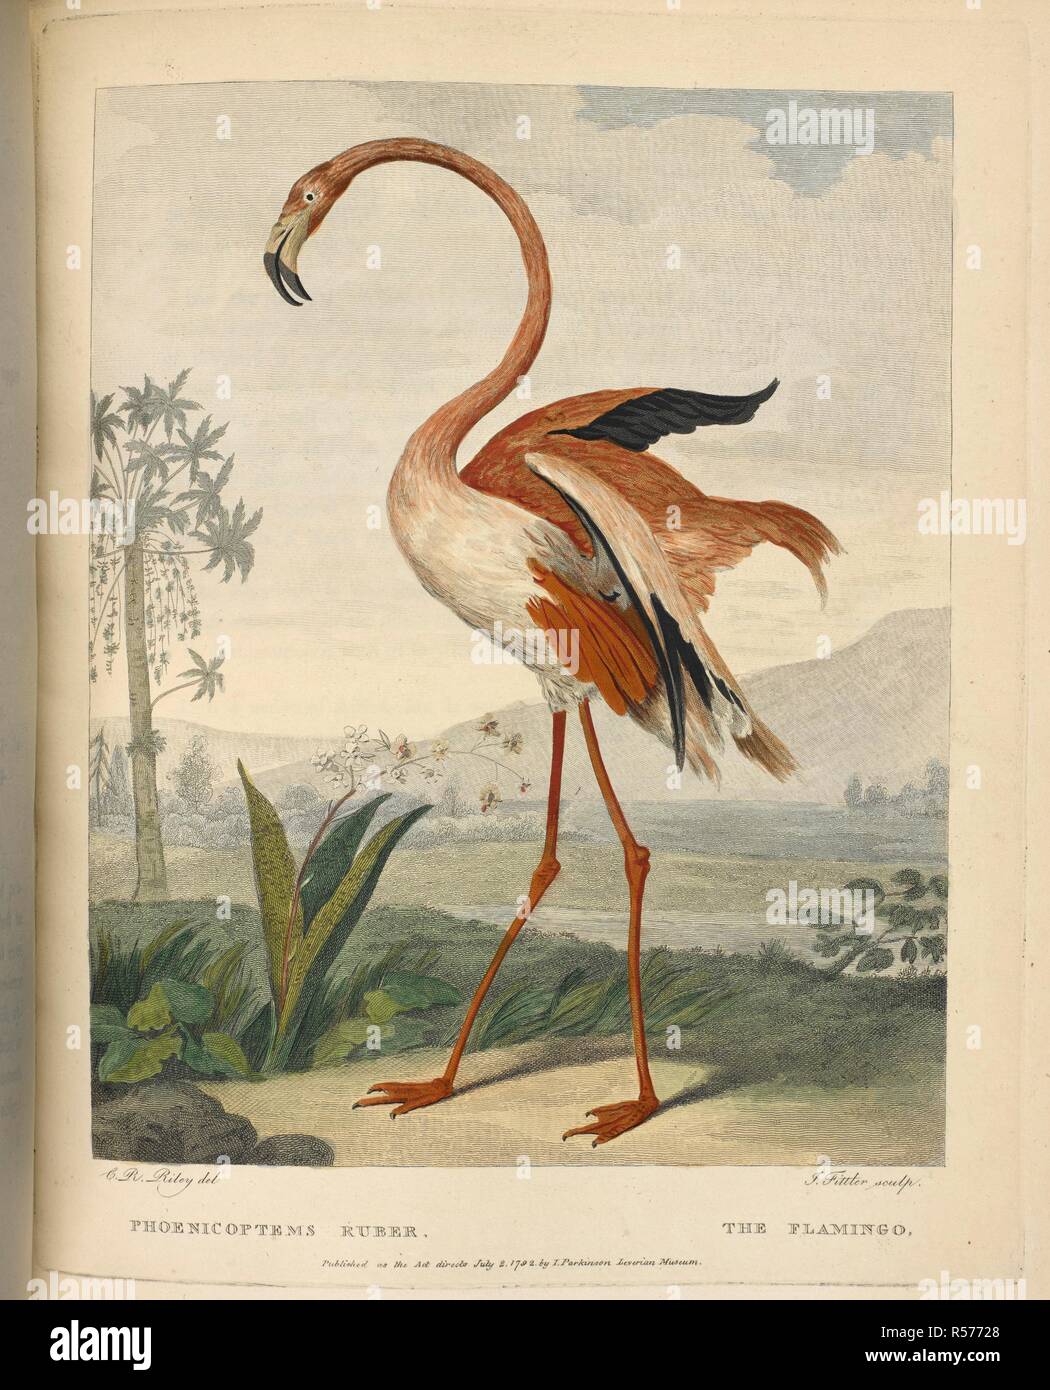 Phoenicoptems ruber. The Flamingo. Musei Leveriani explicatio, Anglica et Latina (containing select specimens from the museum of ... Sir A. Lever), etc. vol. 1, vol. 2, pp. 1-48. Impensis Jacobi Parkinson: [London,] 1792, 96. 1792. Source: 40.e.15 plate opposite page 134. Author: Ryley, Charles Reuben. SHAW GEORGE. Stock Photo